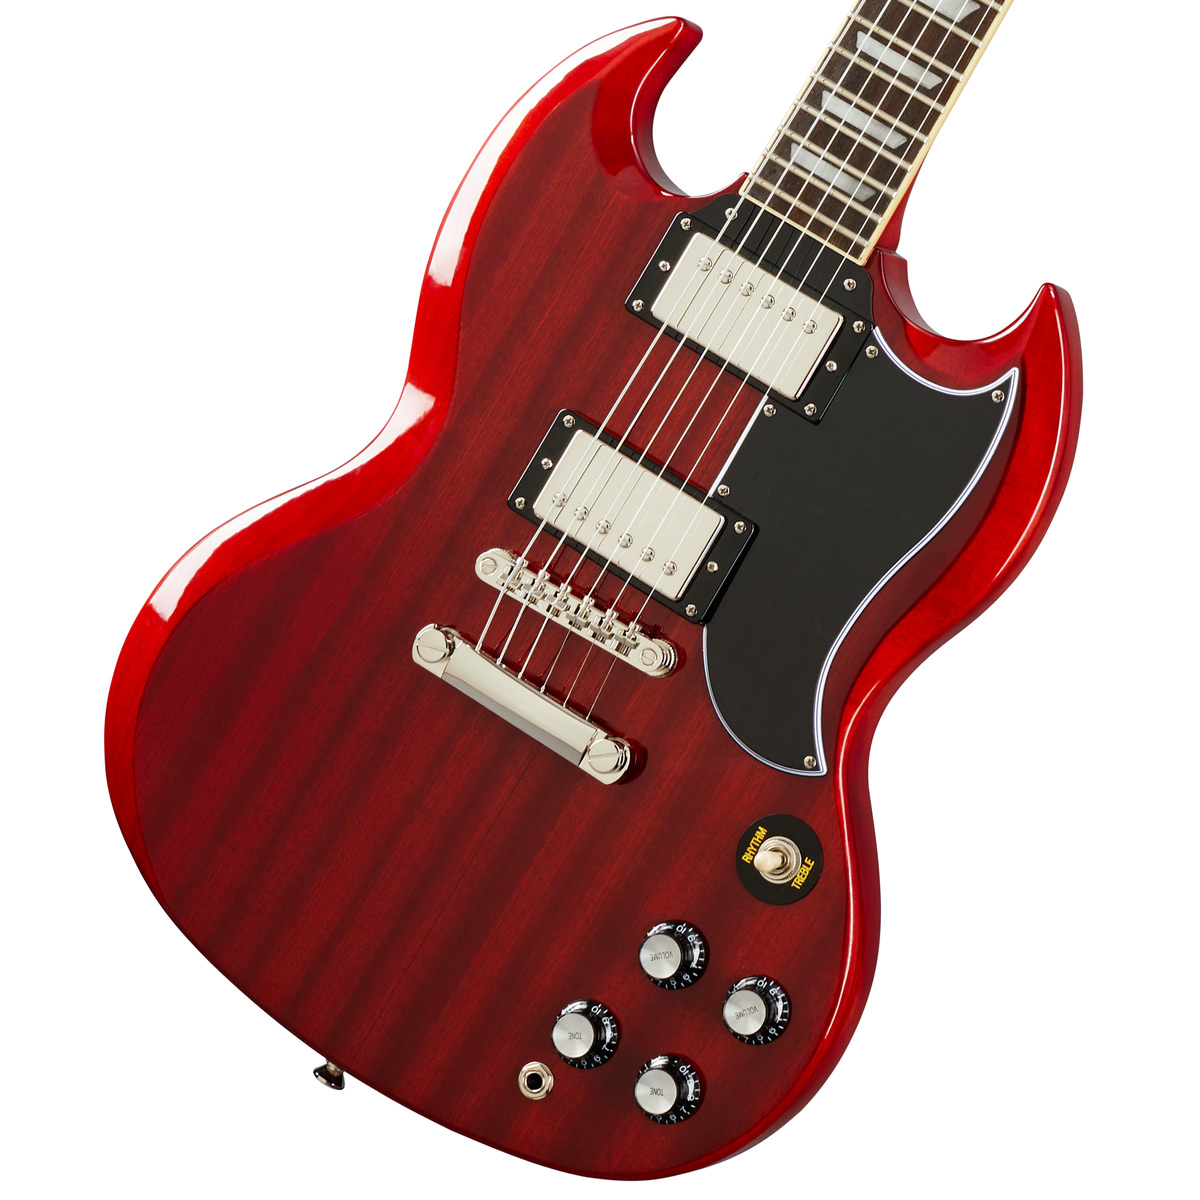 Epiphone / Inspired by Gibson SG Standard 60s Vintage Cherry (SG Standard  61) エピフォン エレキギター